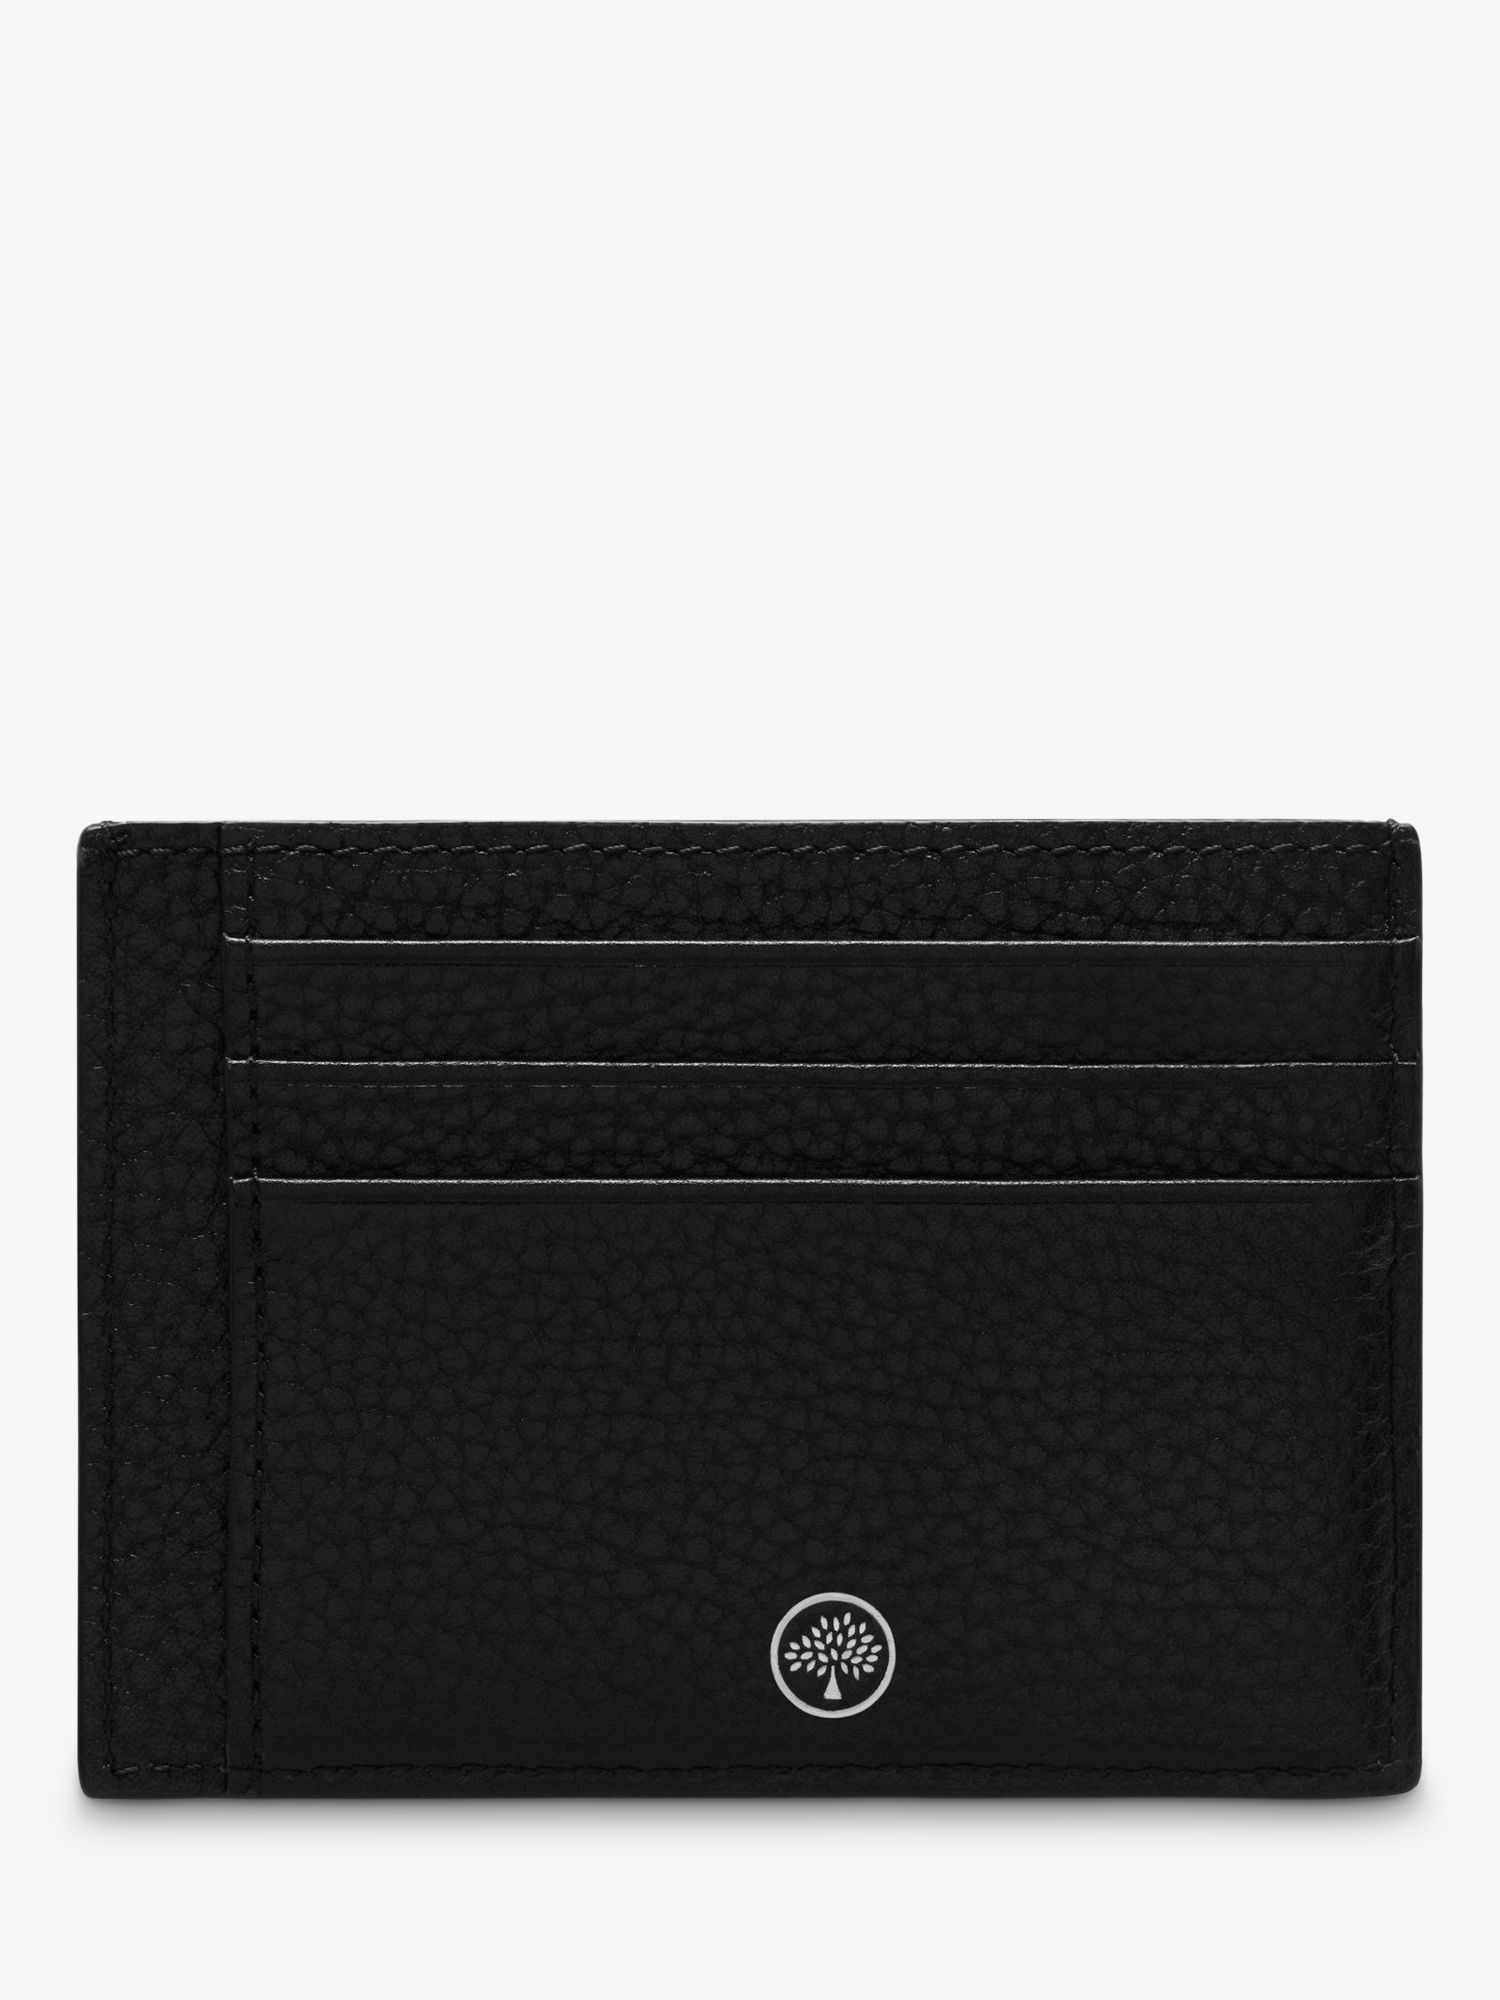 Mulberry Small Classic Grain Leather Card Holder, Black at John Lewis ...